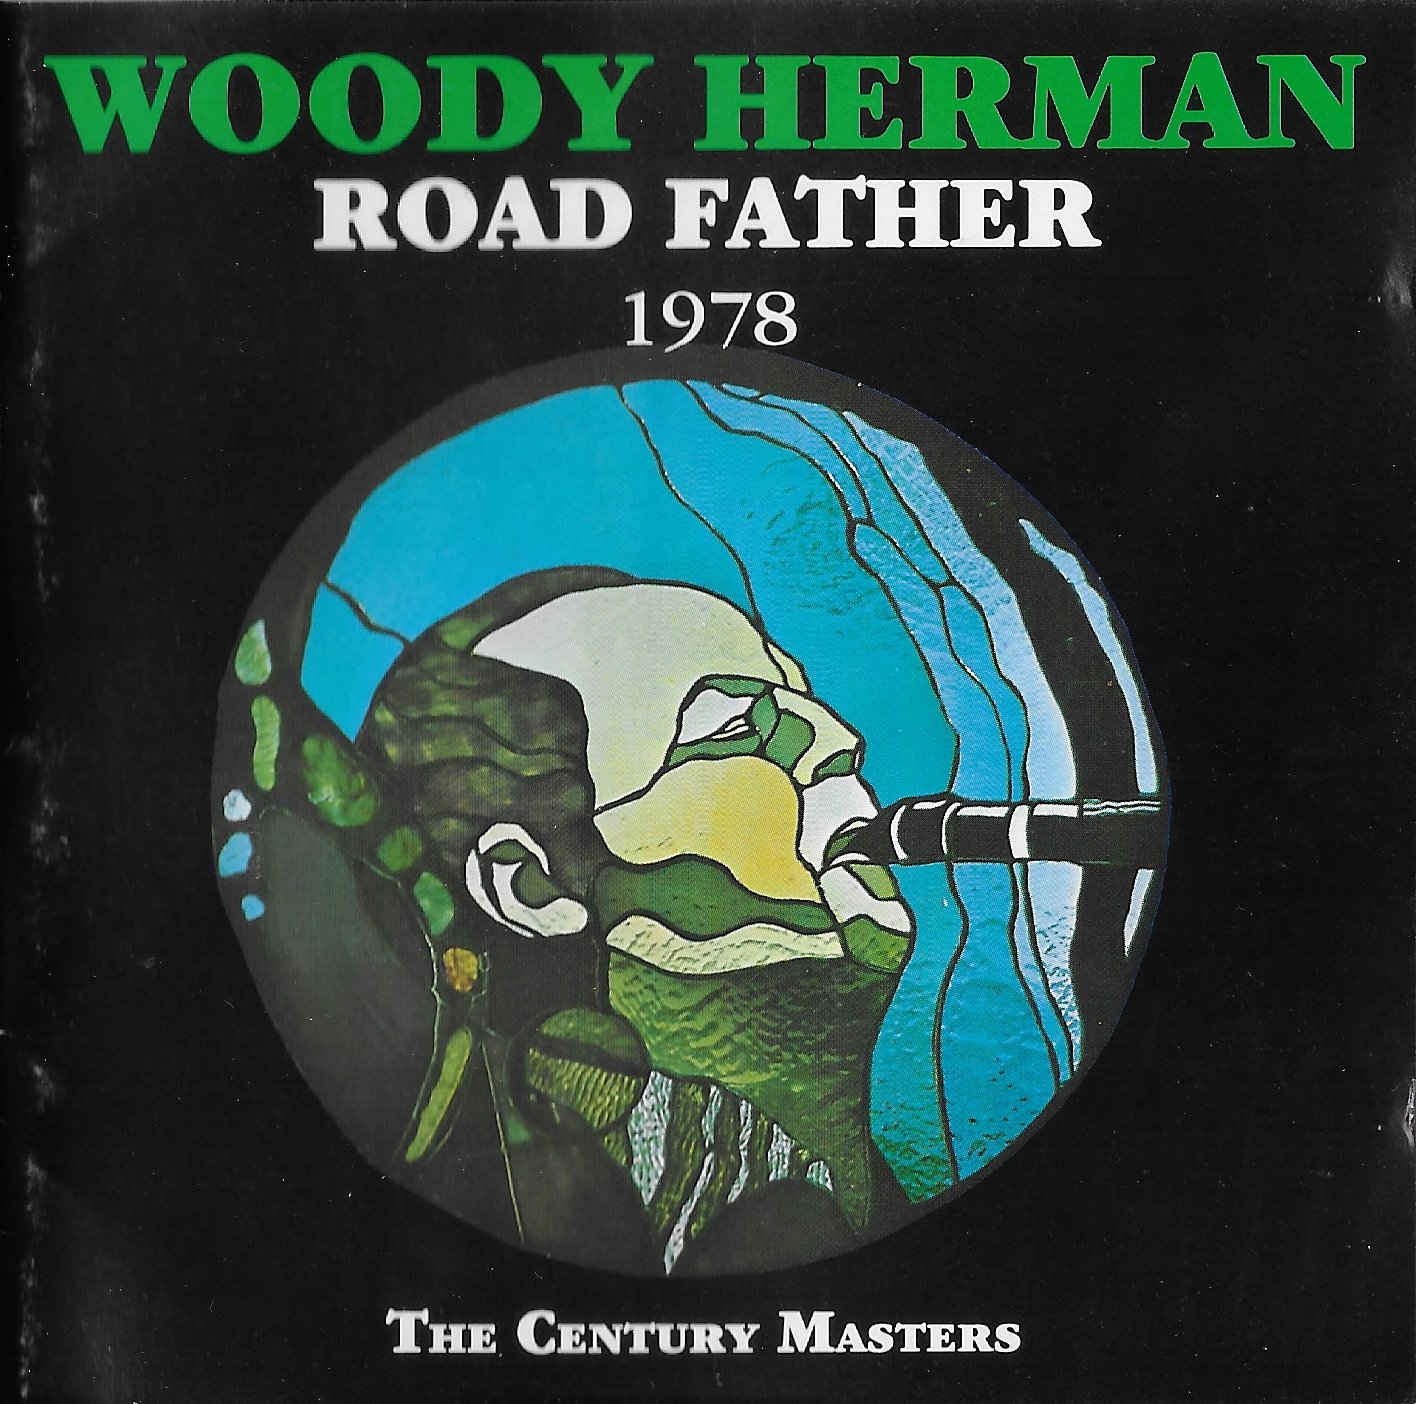 Picture of CJCD 829 The Century Catalogue - Road father by artist Woody Herman from the BBC cds - Records and Tapes library